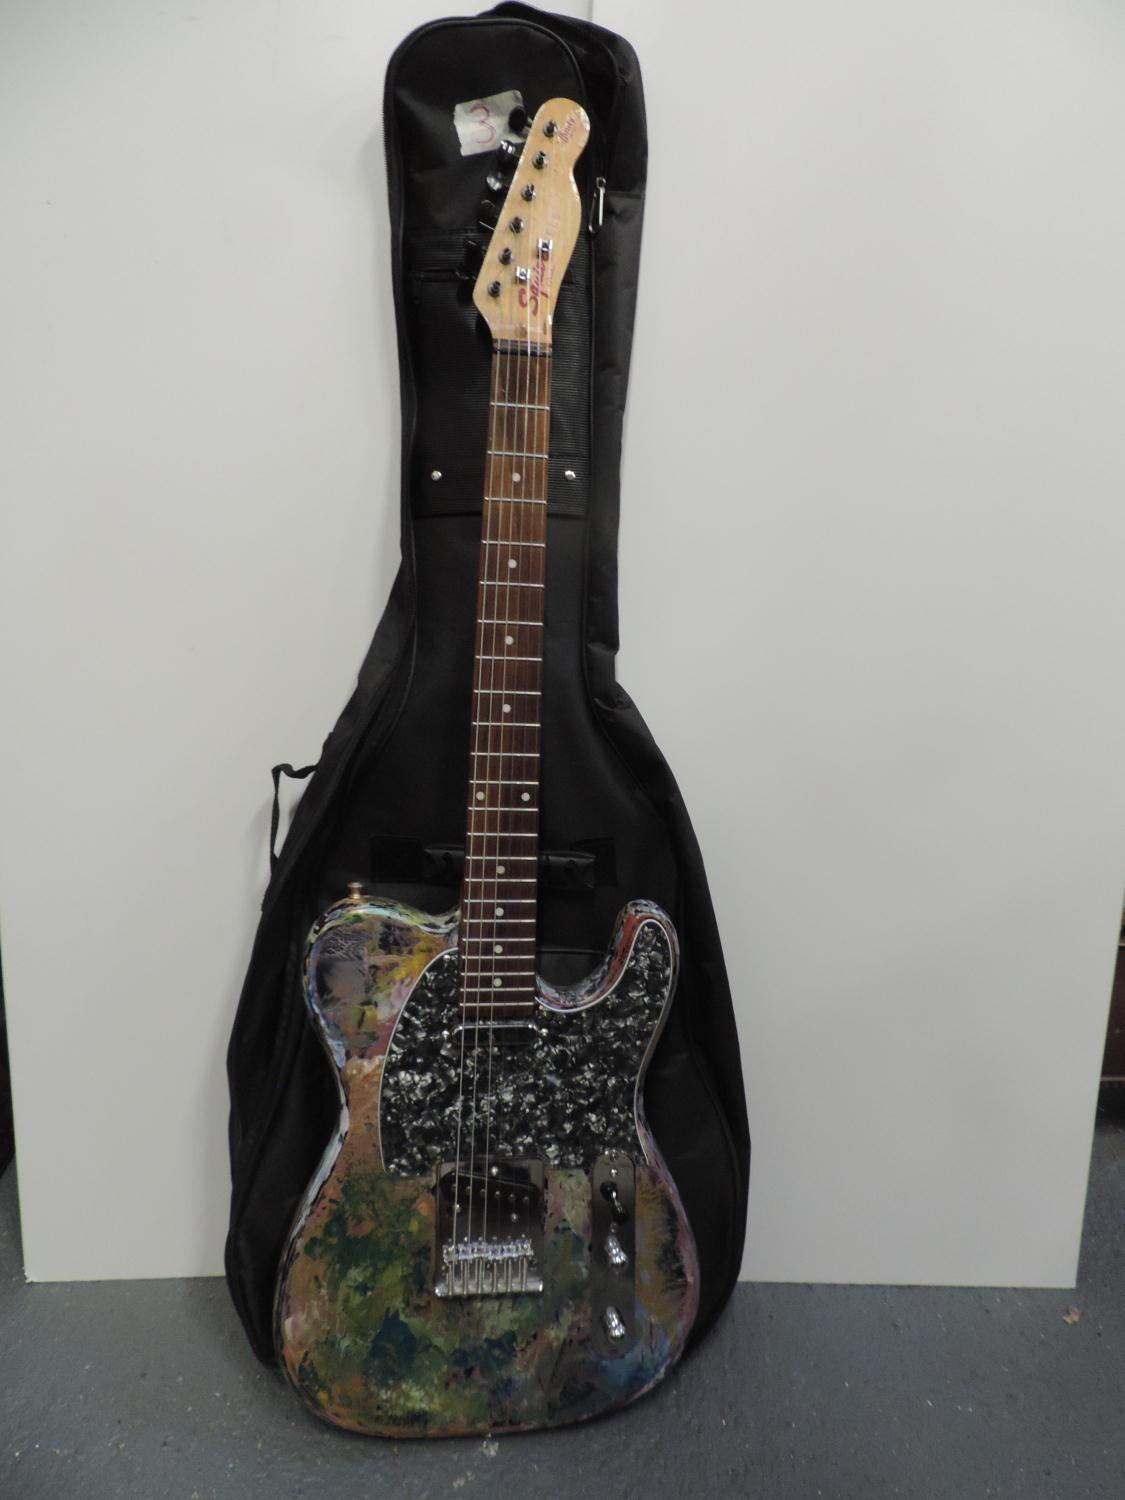 Squier Telecaster Style Customised Guitar with Bag, Strap and Lead